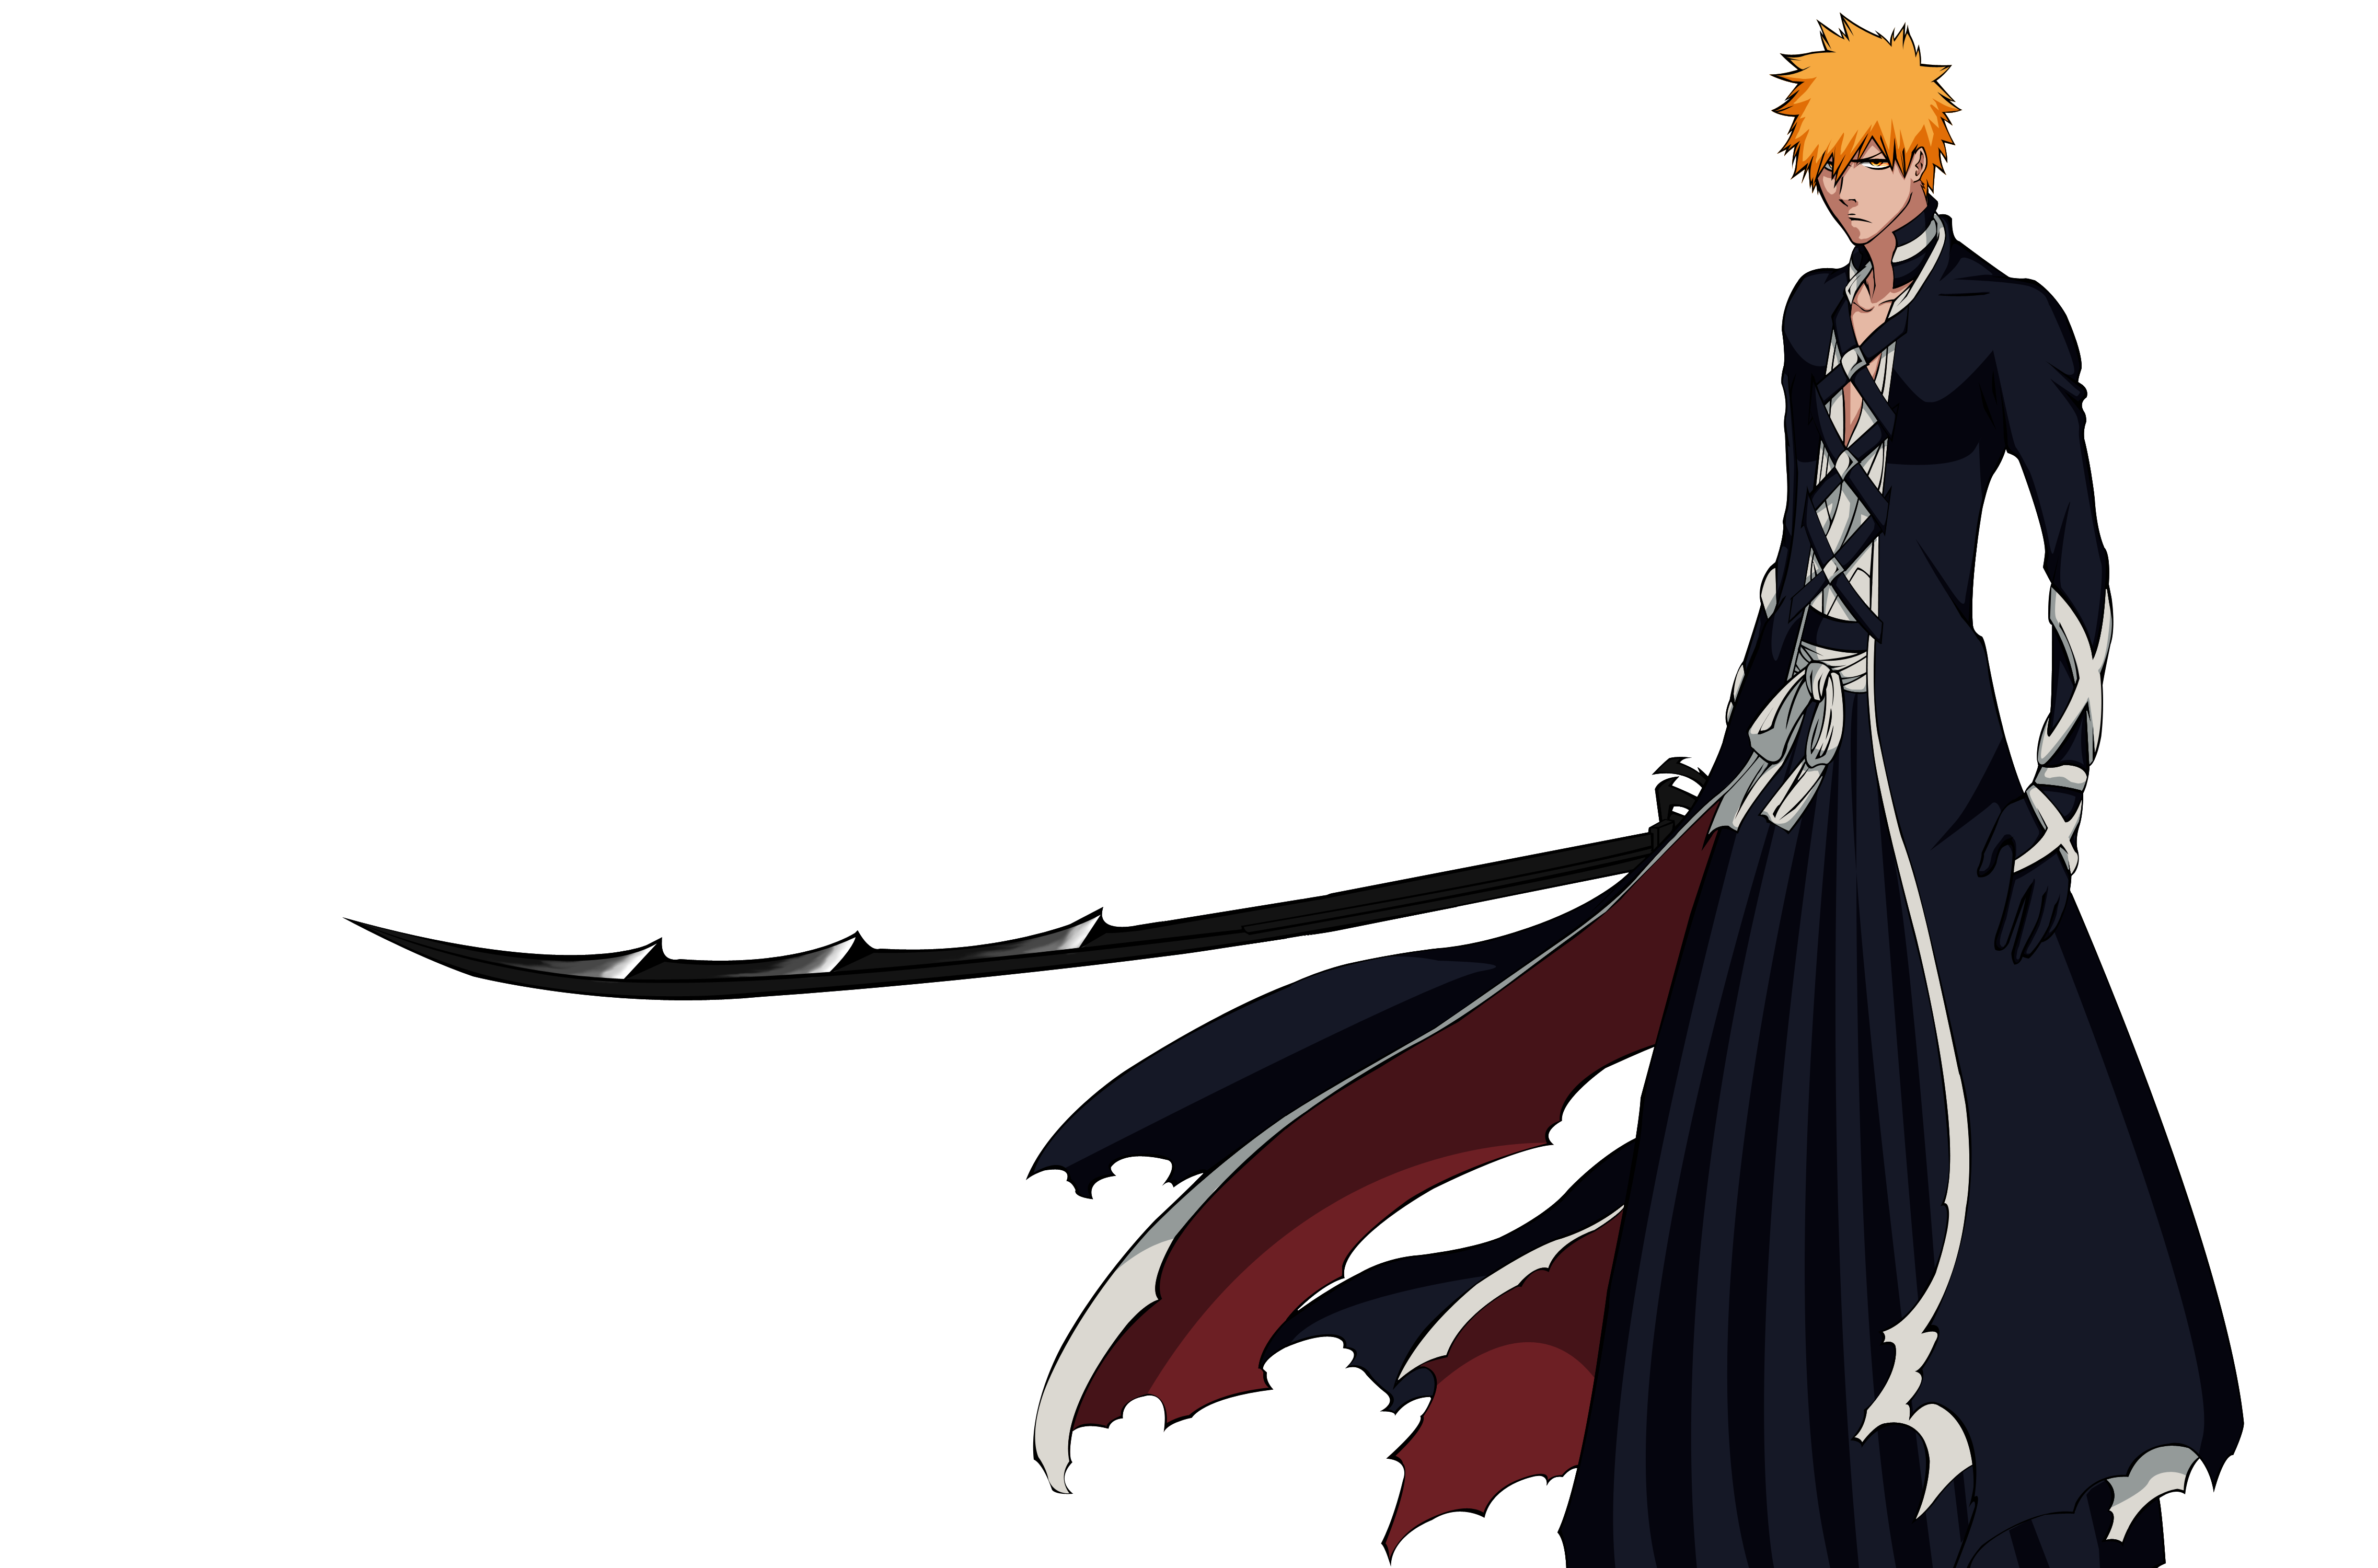 ichigo_new_bankai_render_by_bloodreal-d4i0w8a.png